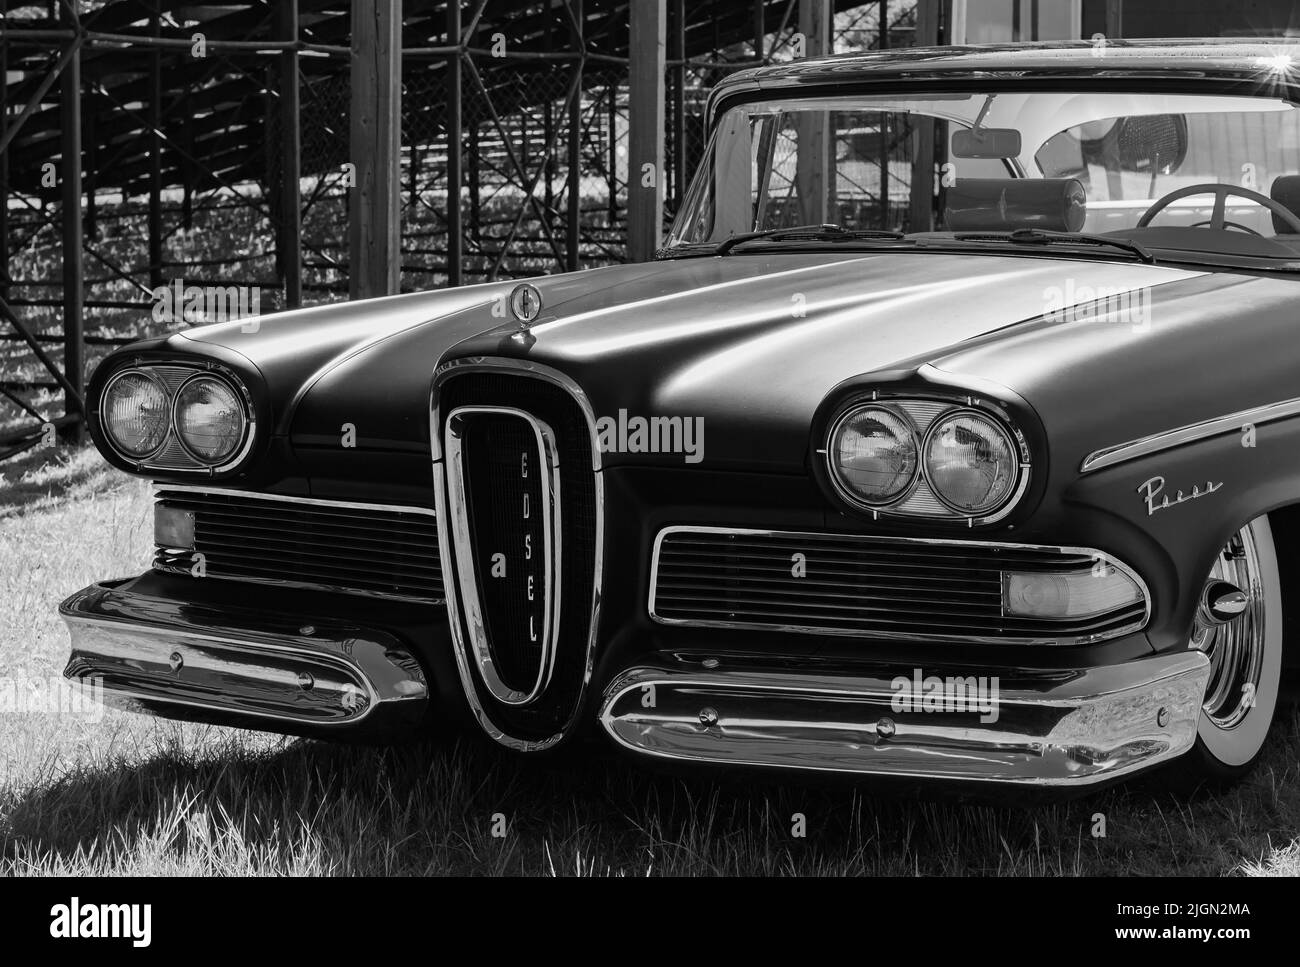 Vintage Ford Edsel Pacer at the Classic Car Show. Full-size car Edsel Pacer Convertible, 1958. Street photo, nobody, selective focus, editorial-July 1 Stock Photo